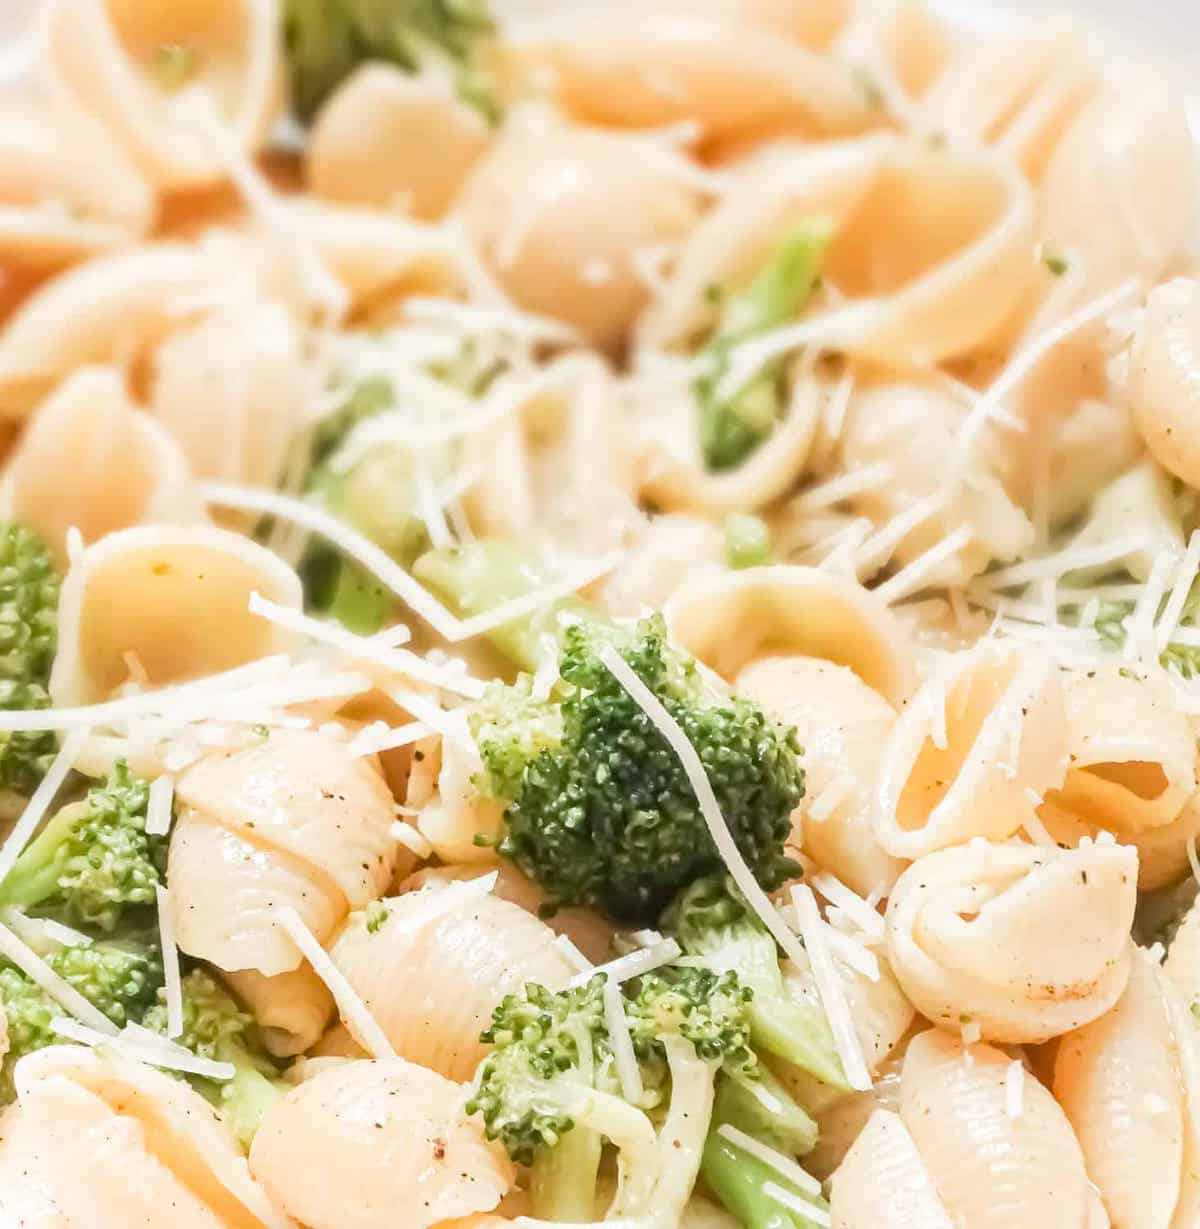 garlic broccoli pasta topped with parmesan cheese in a white bowl